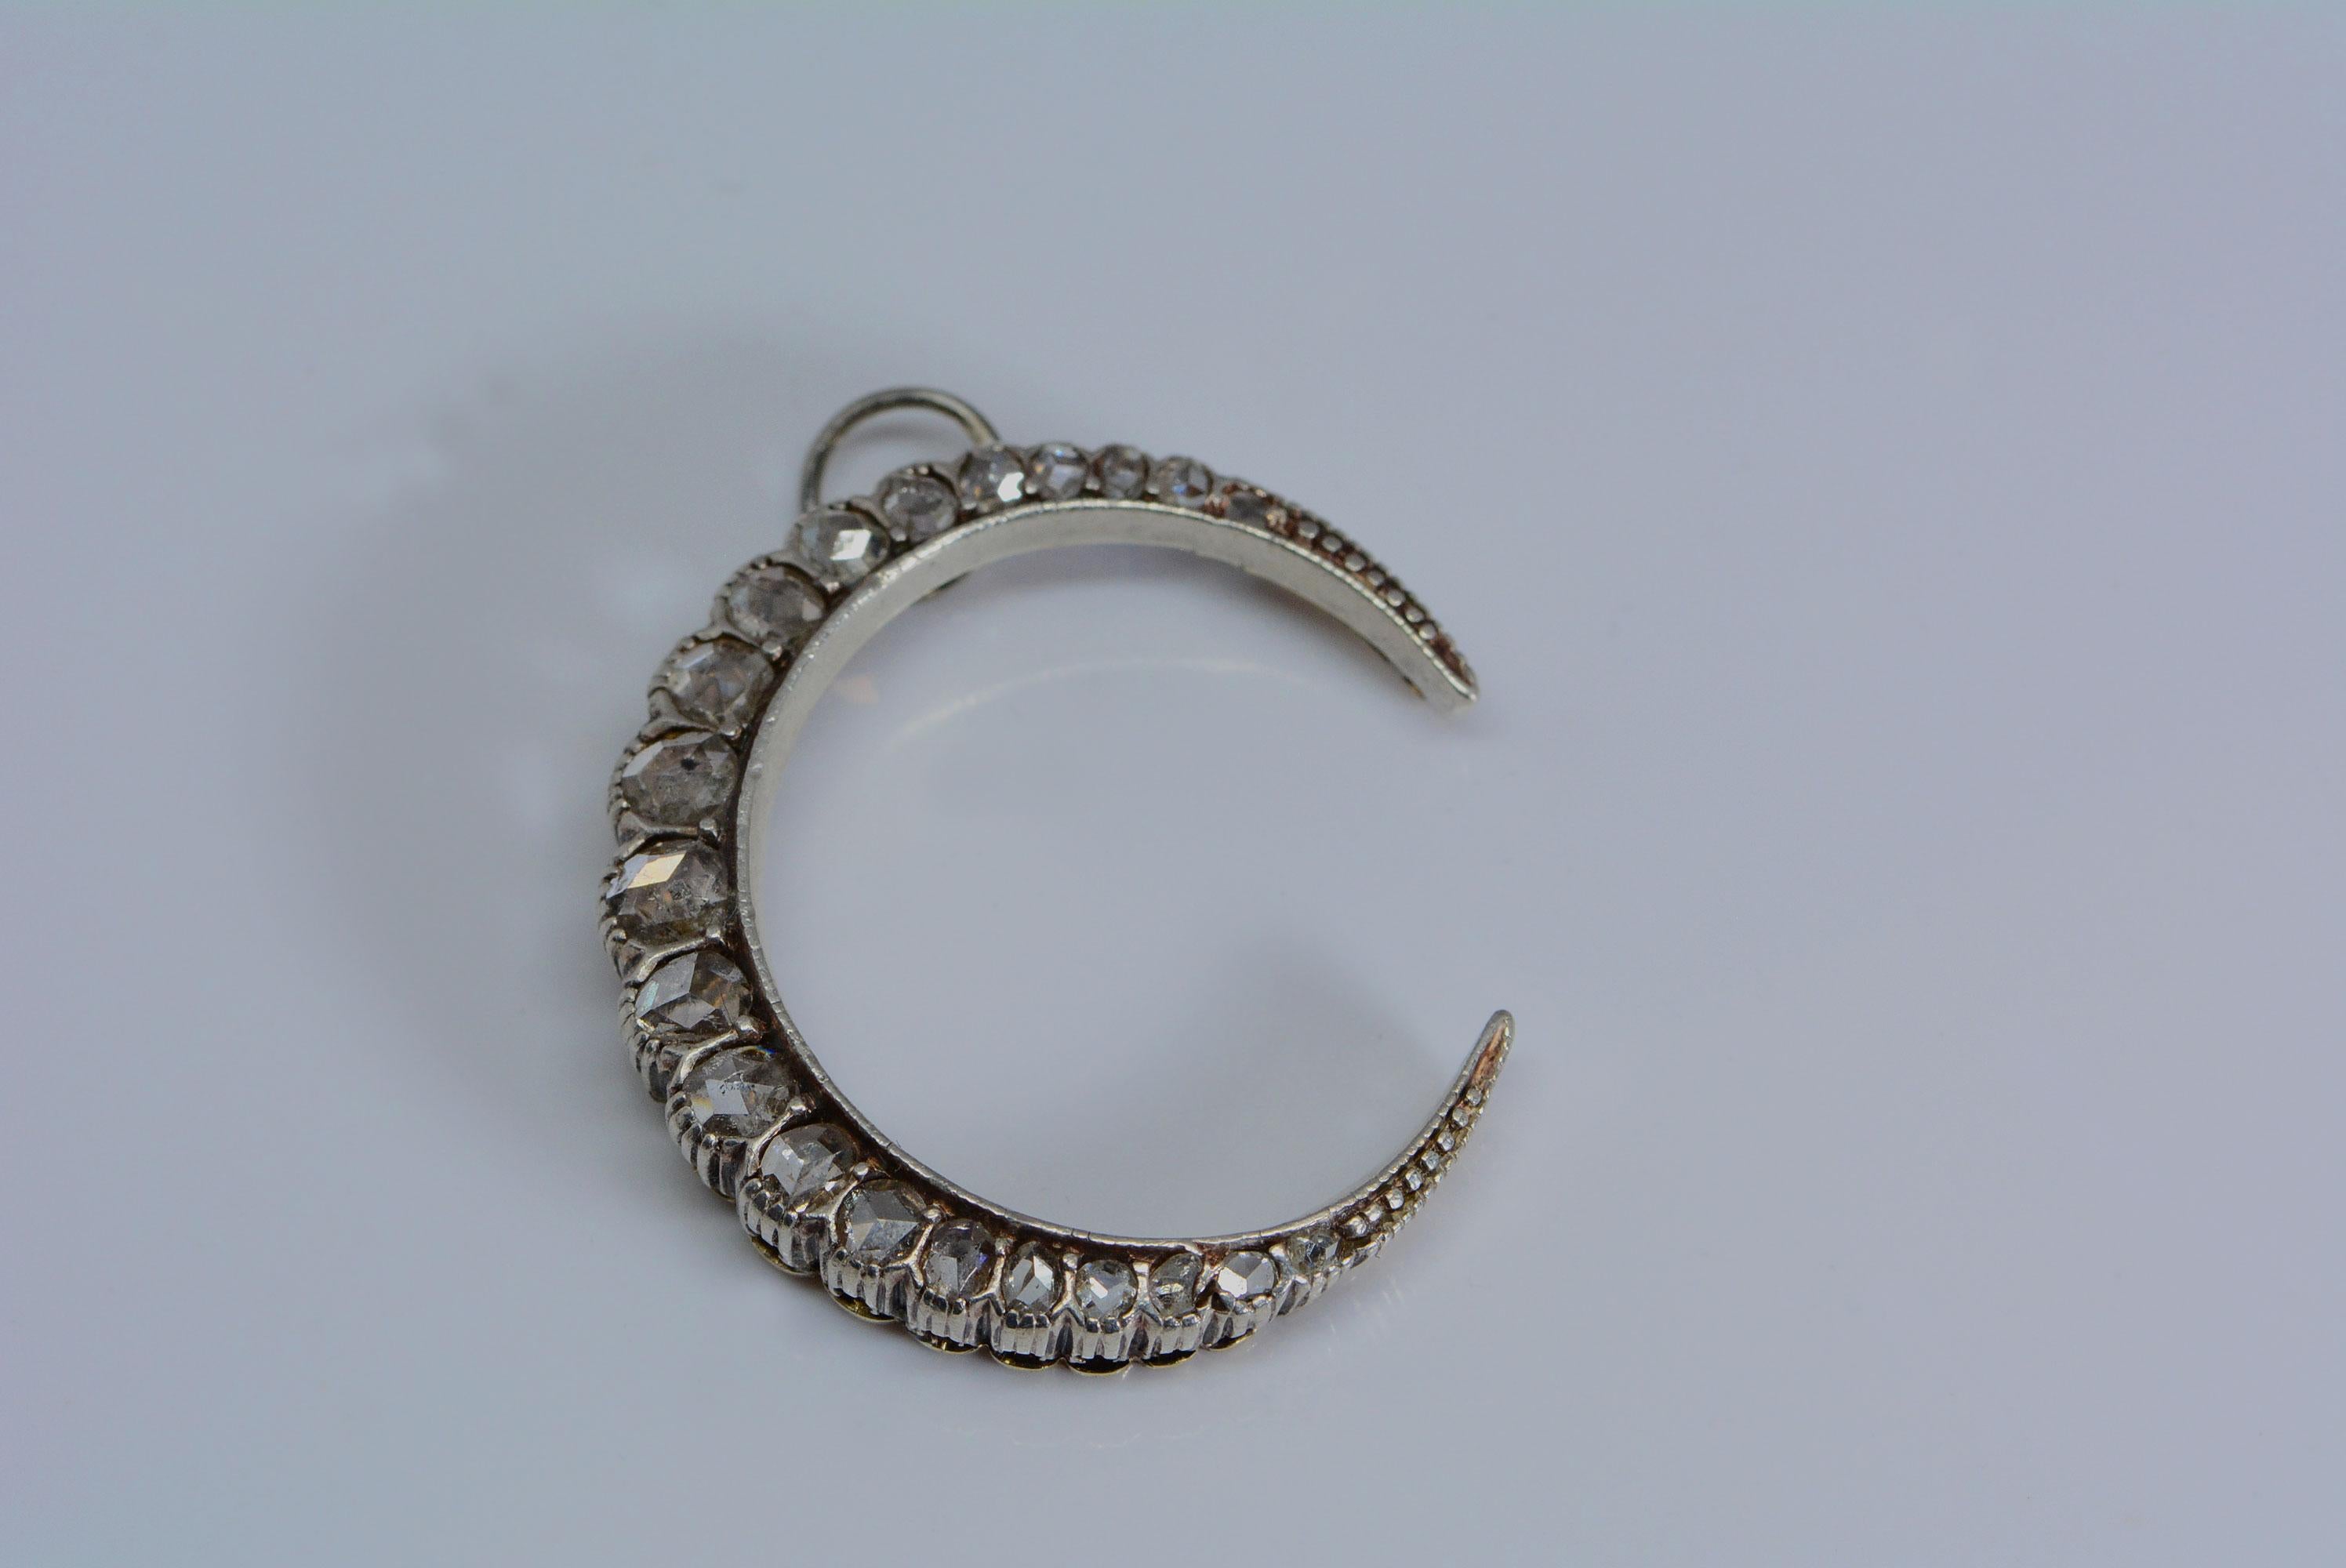 This beautiful crescent represents the moon goddess, (Artemis, Diana Triformis, Luna) glowing and divine. 

Most crescent jewels are typically silver backed with yellow gold or made entirely out of yellow gold. 
This crescent is made from platinum